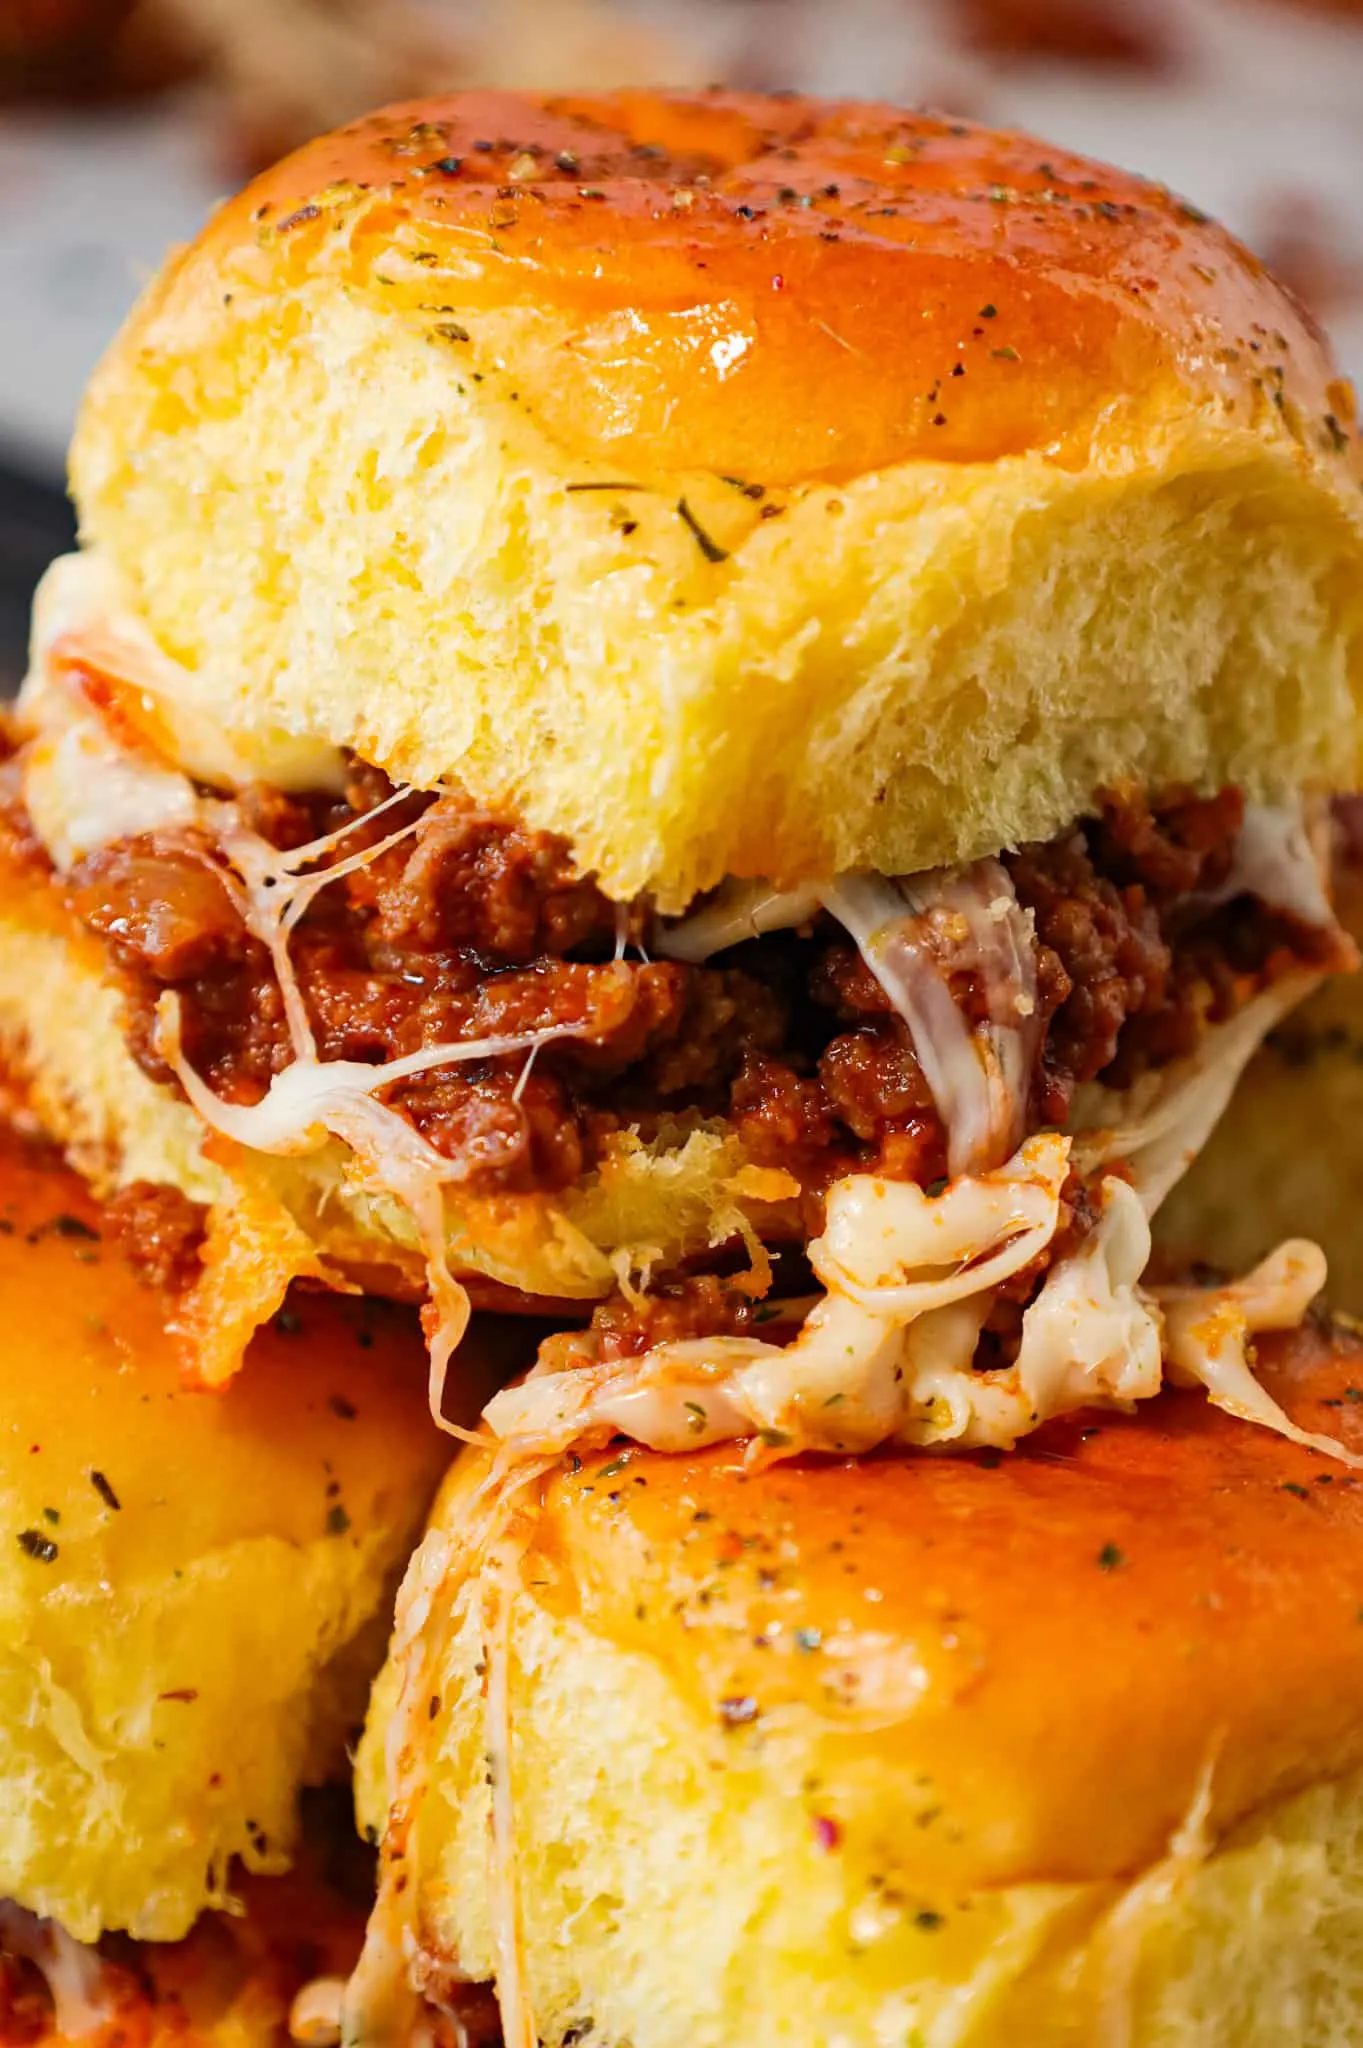 Sloppy Joe Sliders are an easy ground beef recipe perfect for a family friendly weeknight dinner or as a party snack.